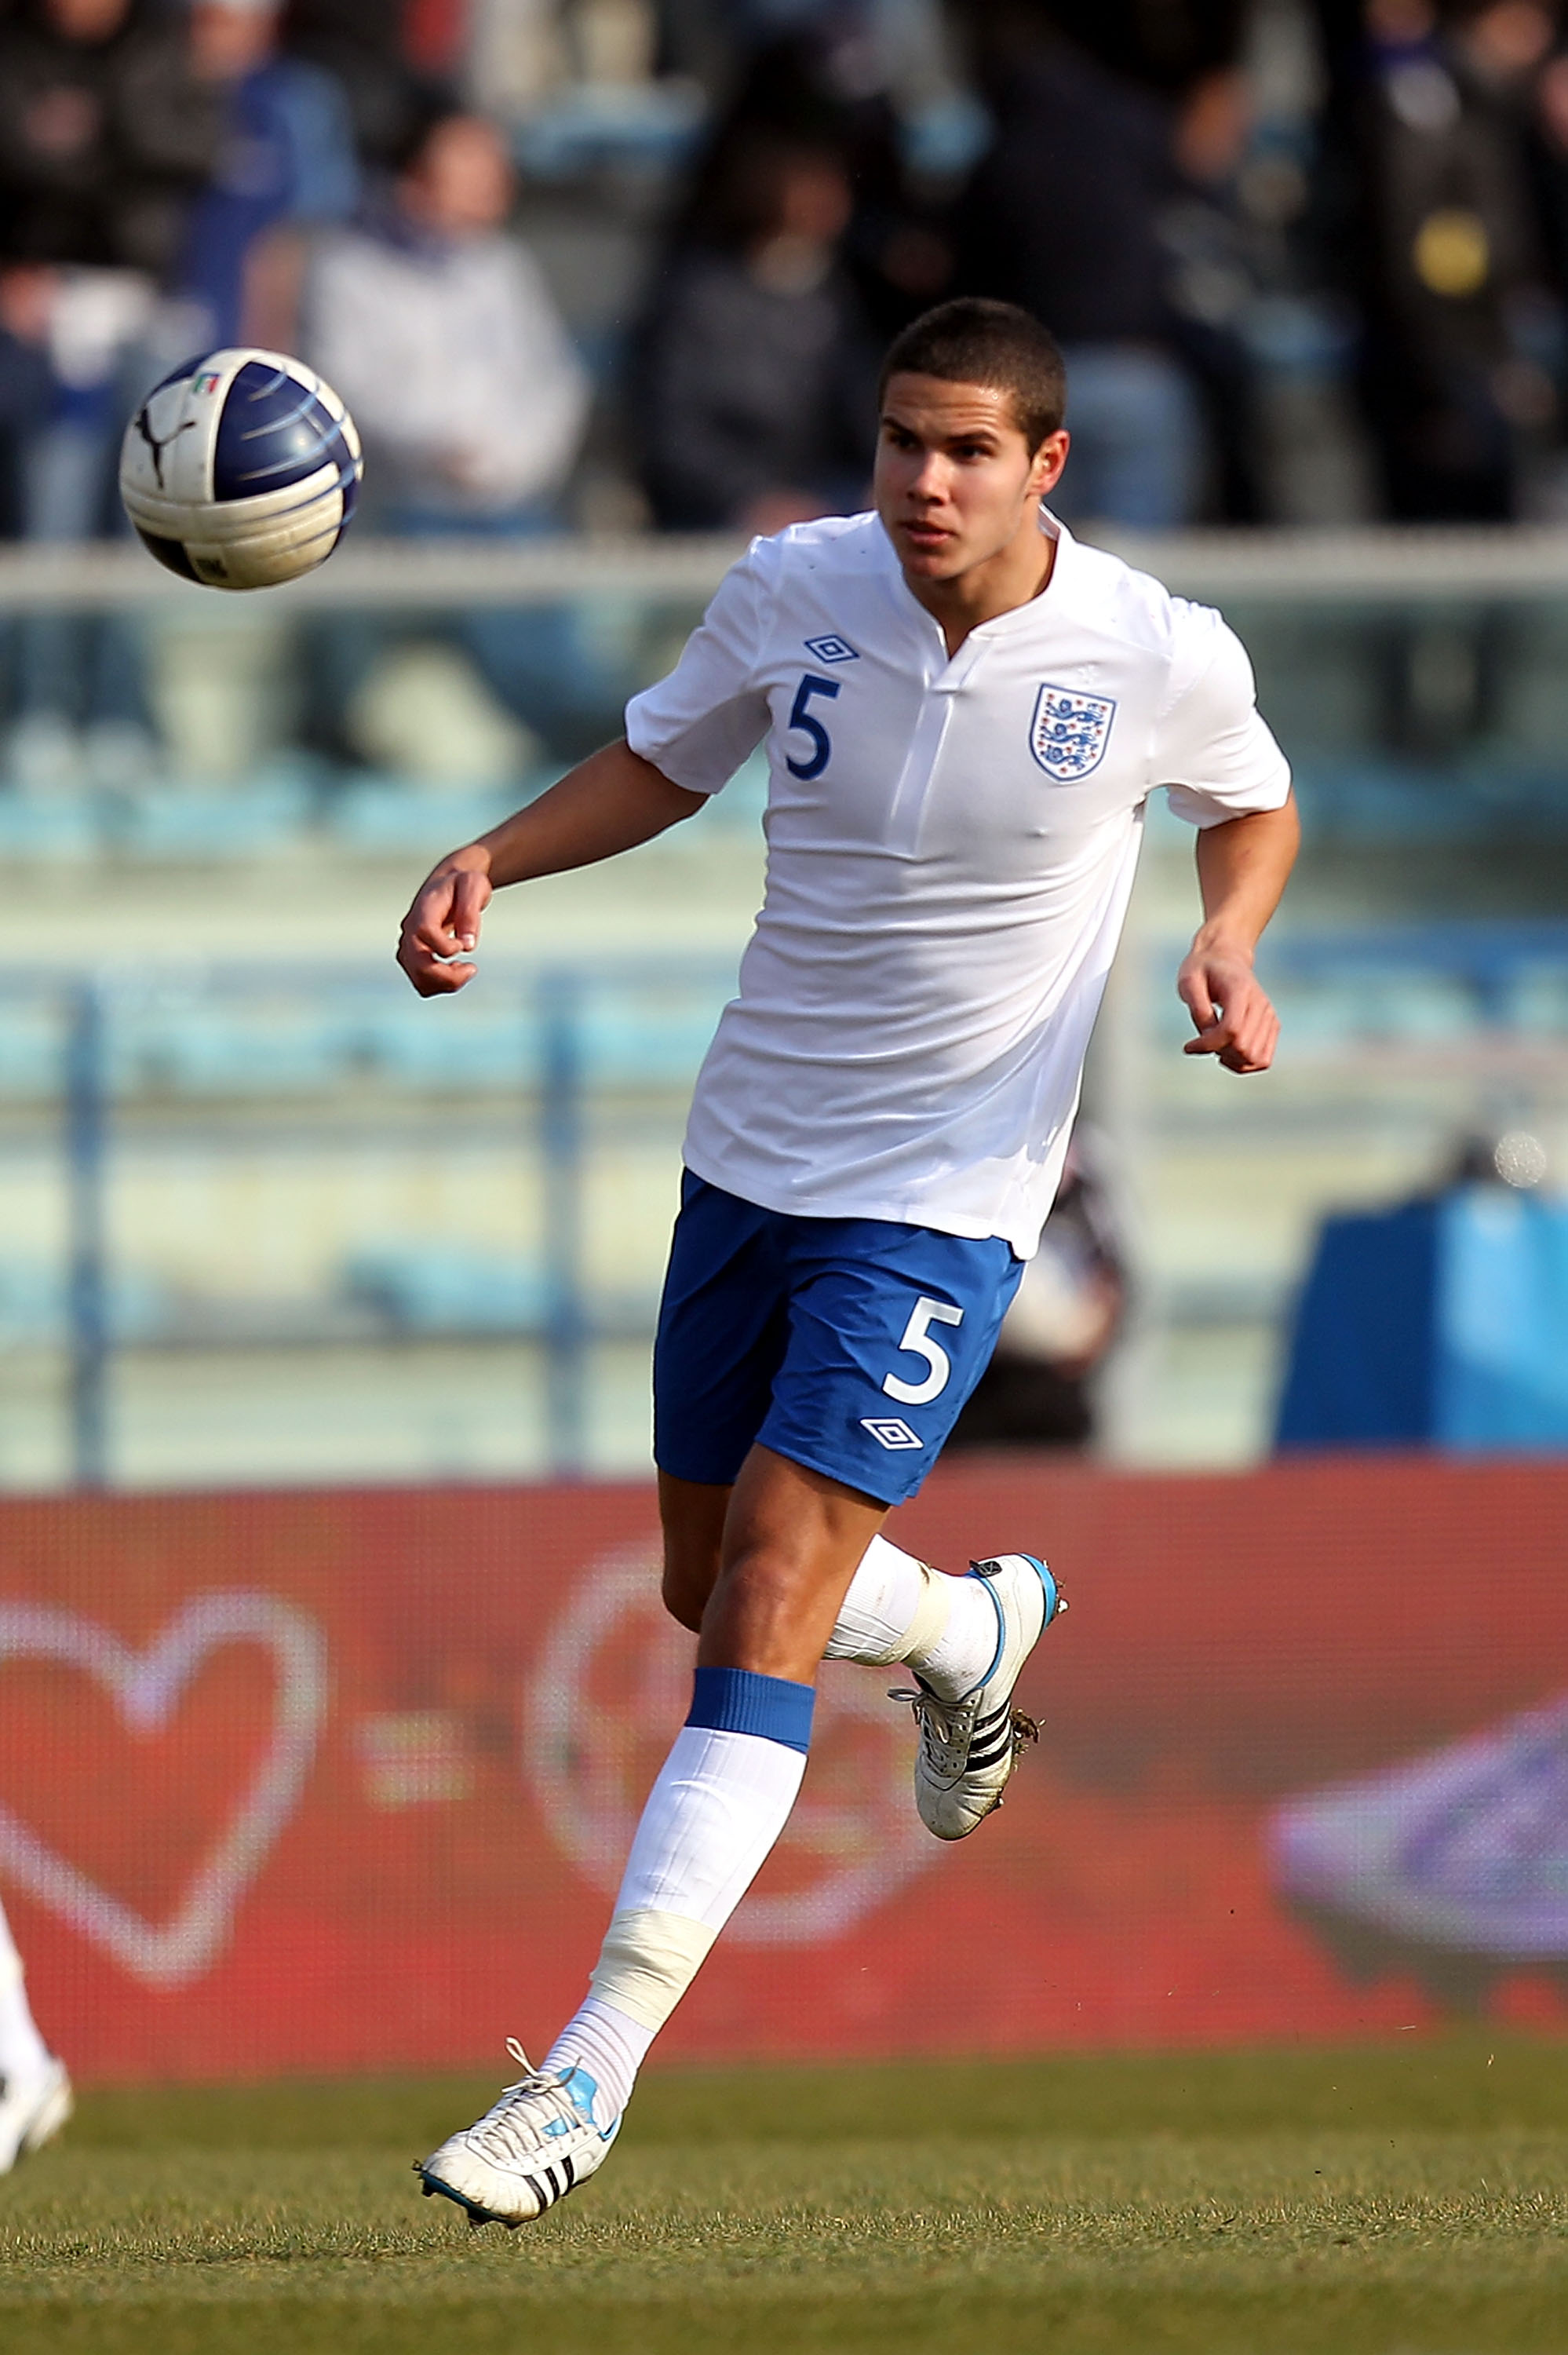 EMPOLI, ITALY - FEBRUARY 08: Jack Rodwell of England in action during the international friendly match between Italy U21 and England U21 at Stadio Carlo Castellani on February 8, 2011 in Empoli, Italy.  (Photo by Gabriele Maltinti/Getty Images)